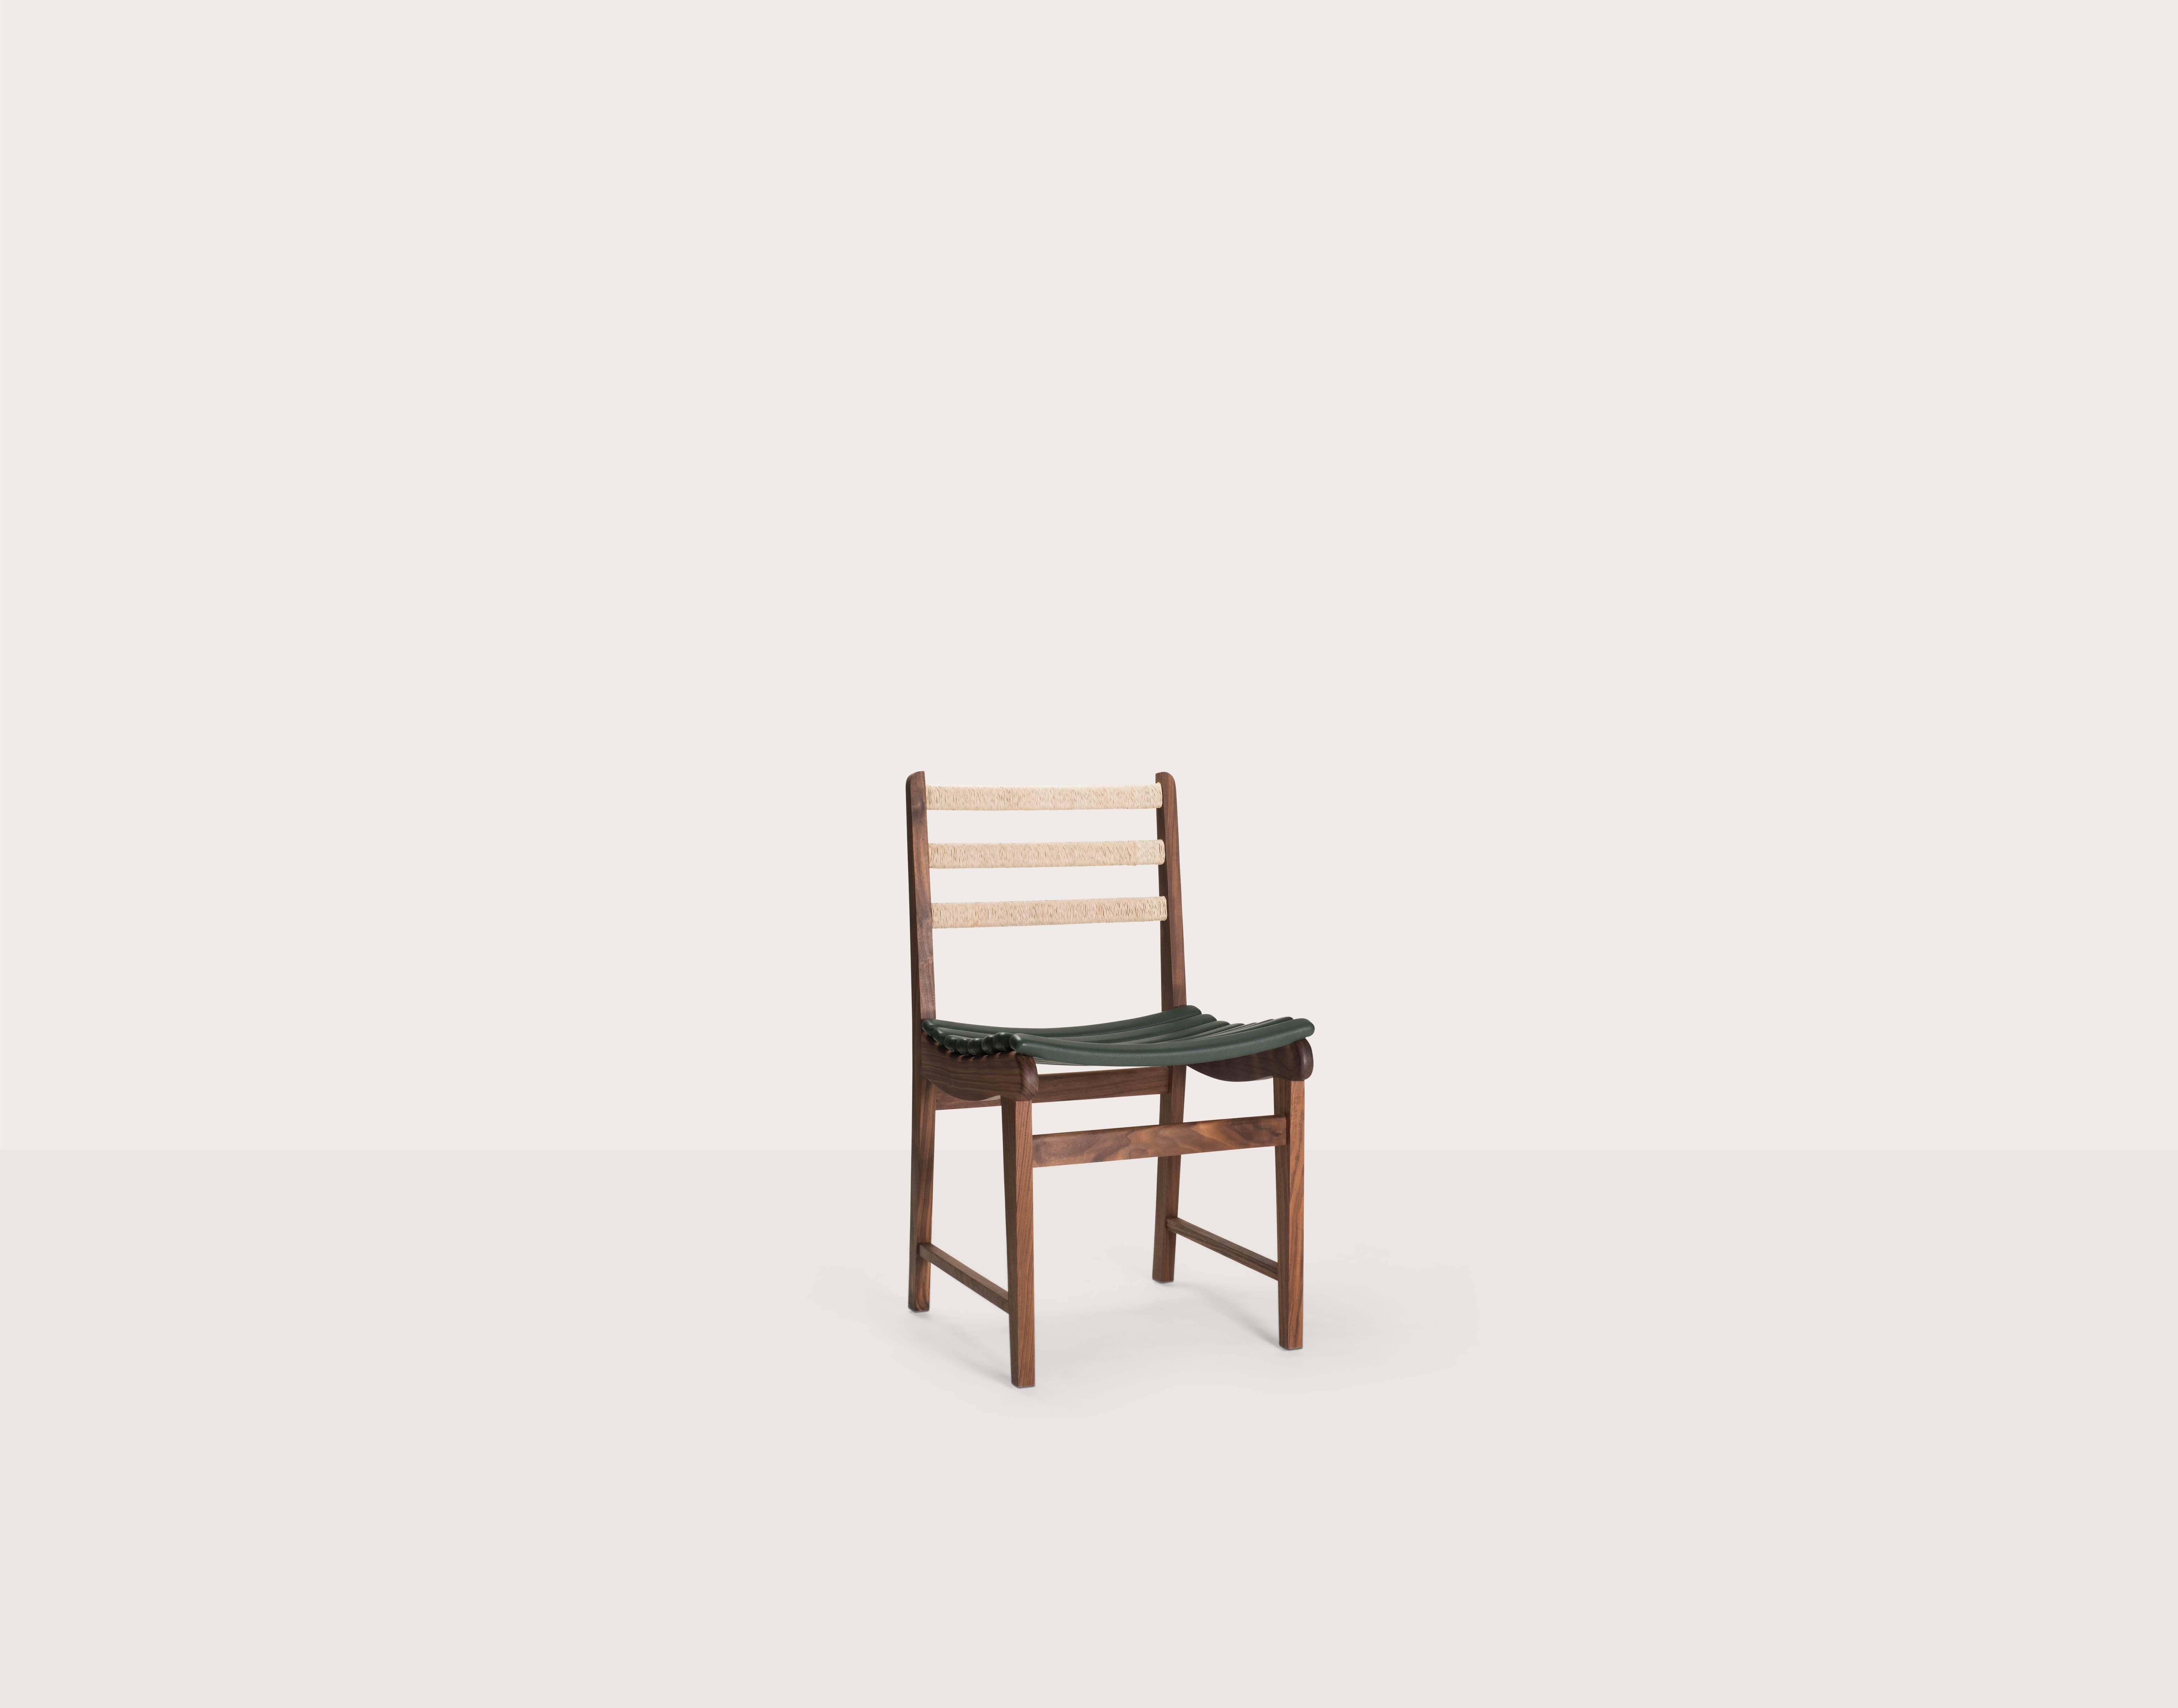 The San Miguelito dining chair was designed in circa 1945 by Michael van Beuren, an American who attended Germany's prestigious Bauhaus school and later immigrated to Mexico to become one of the most famous furniture designers of 20th Century. He